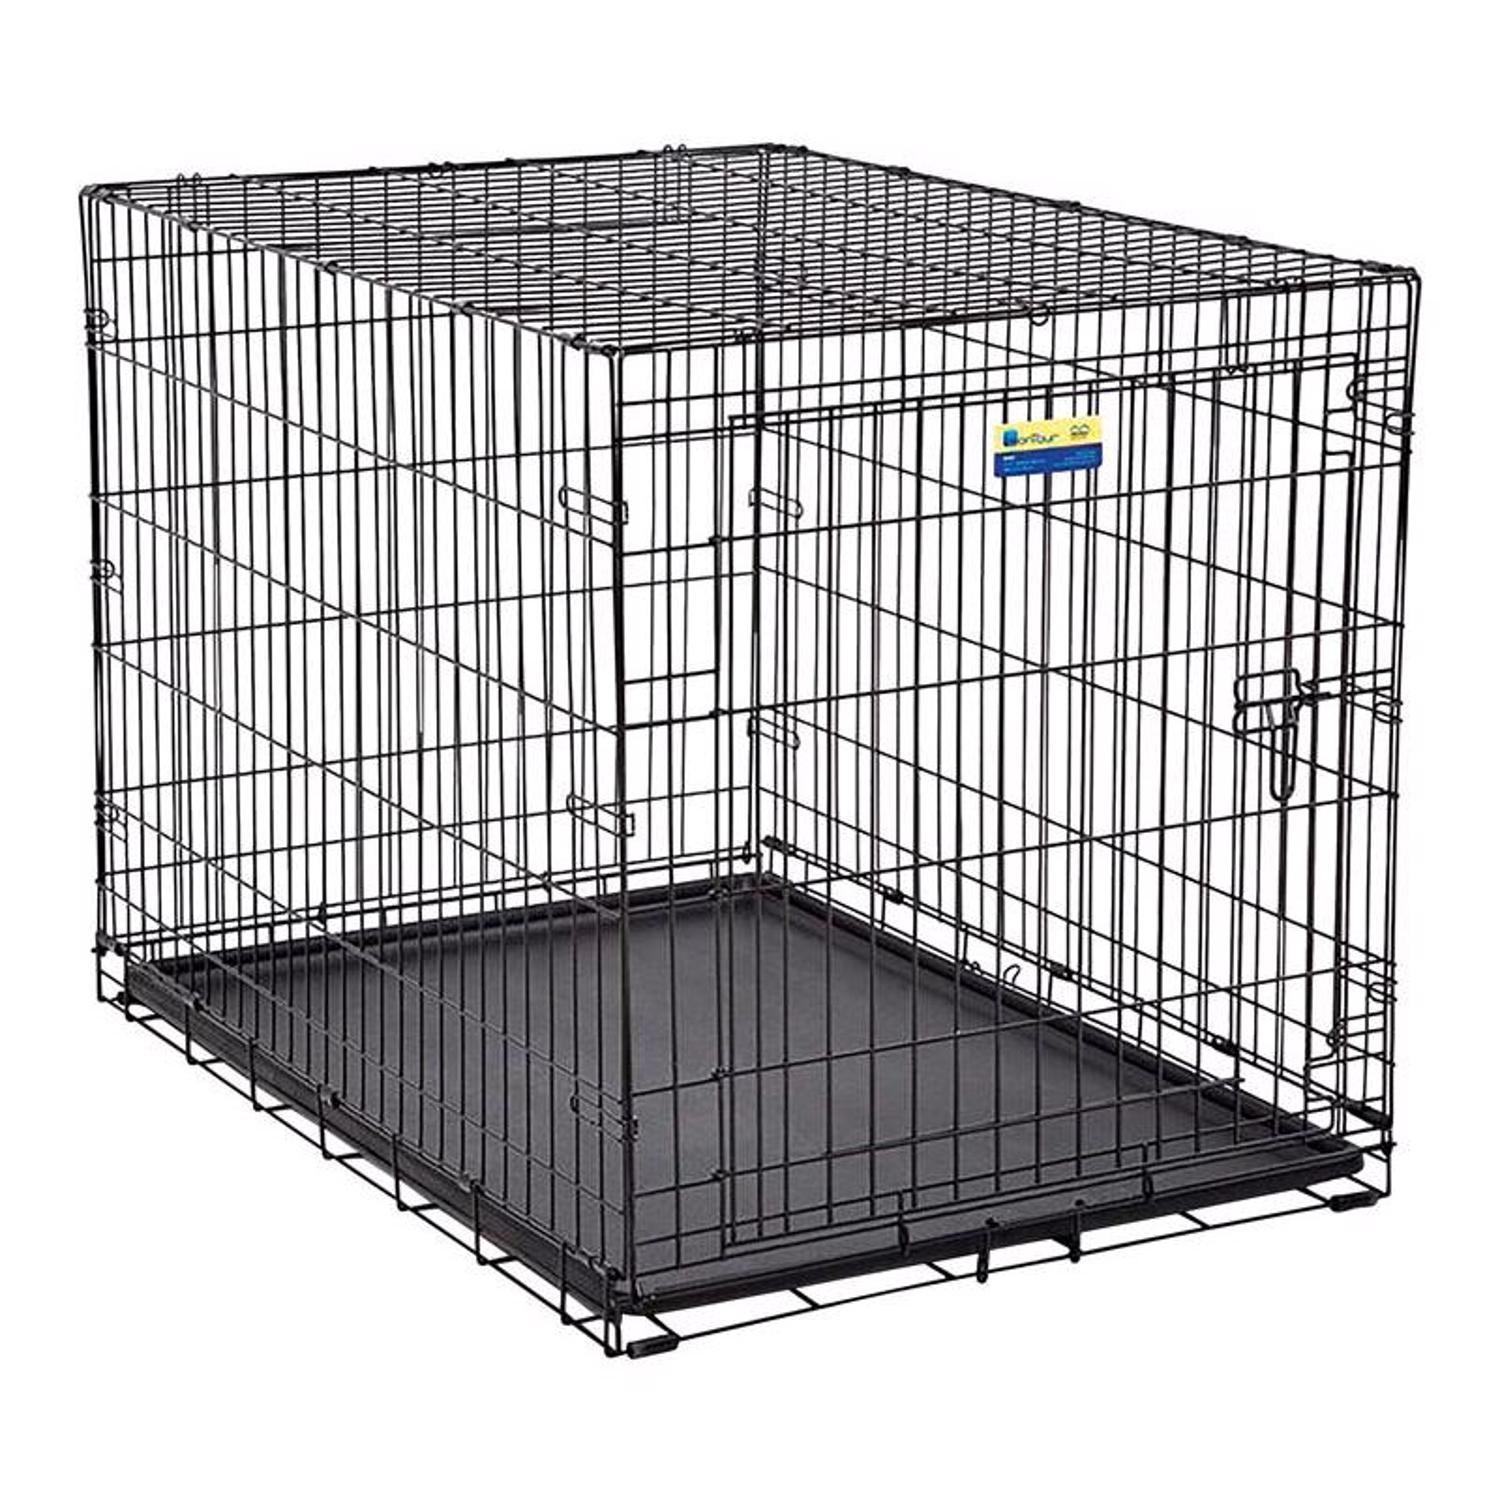 Photos - Other interior and decor Steel Pet Essentials Large  Dog Crate Black 30 in. H X 28 in. W X 42 in. D 